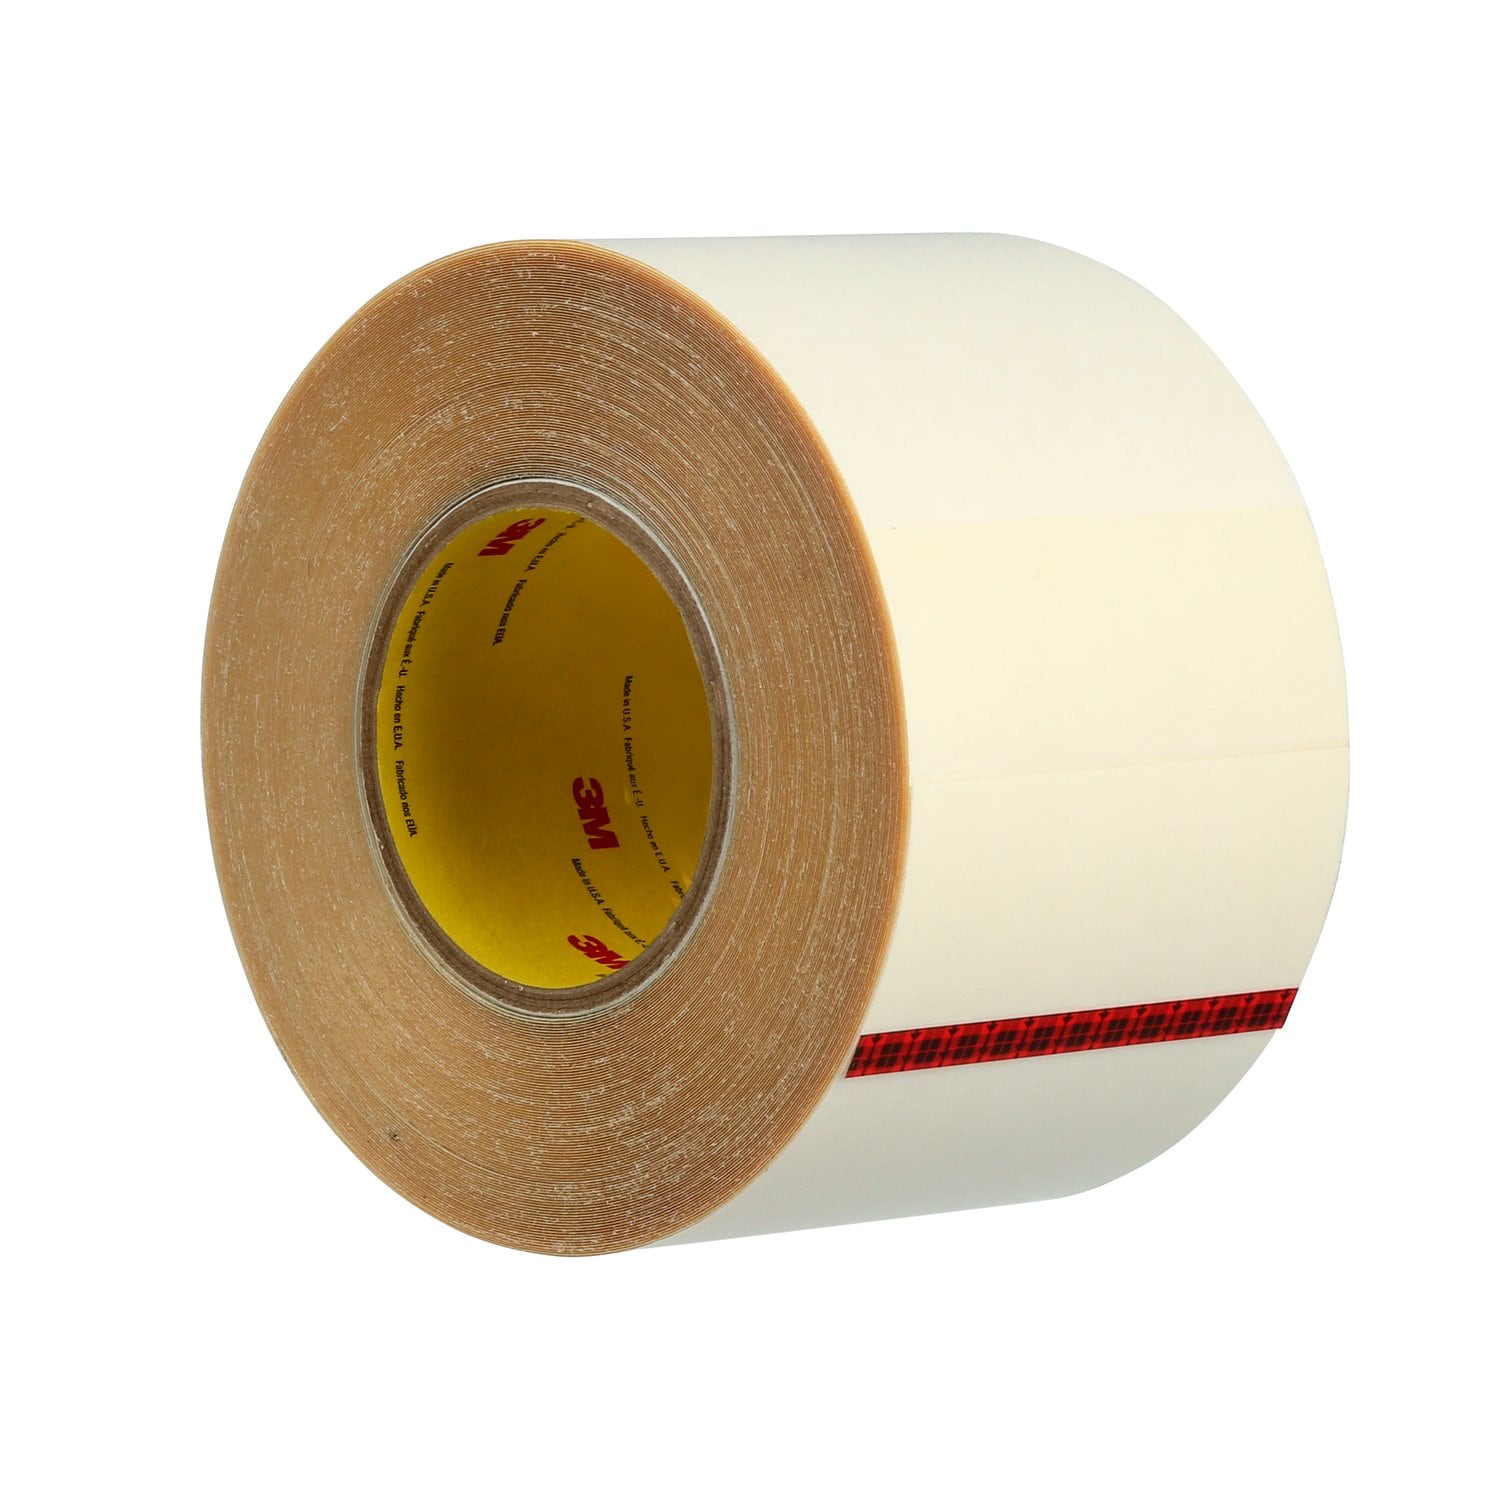 3M 6141 Water Activated Paper Tape Natural Light Duty, 1-1/2 in x 500 ft, 20 Rolls per Case Bulk